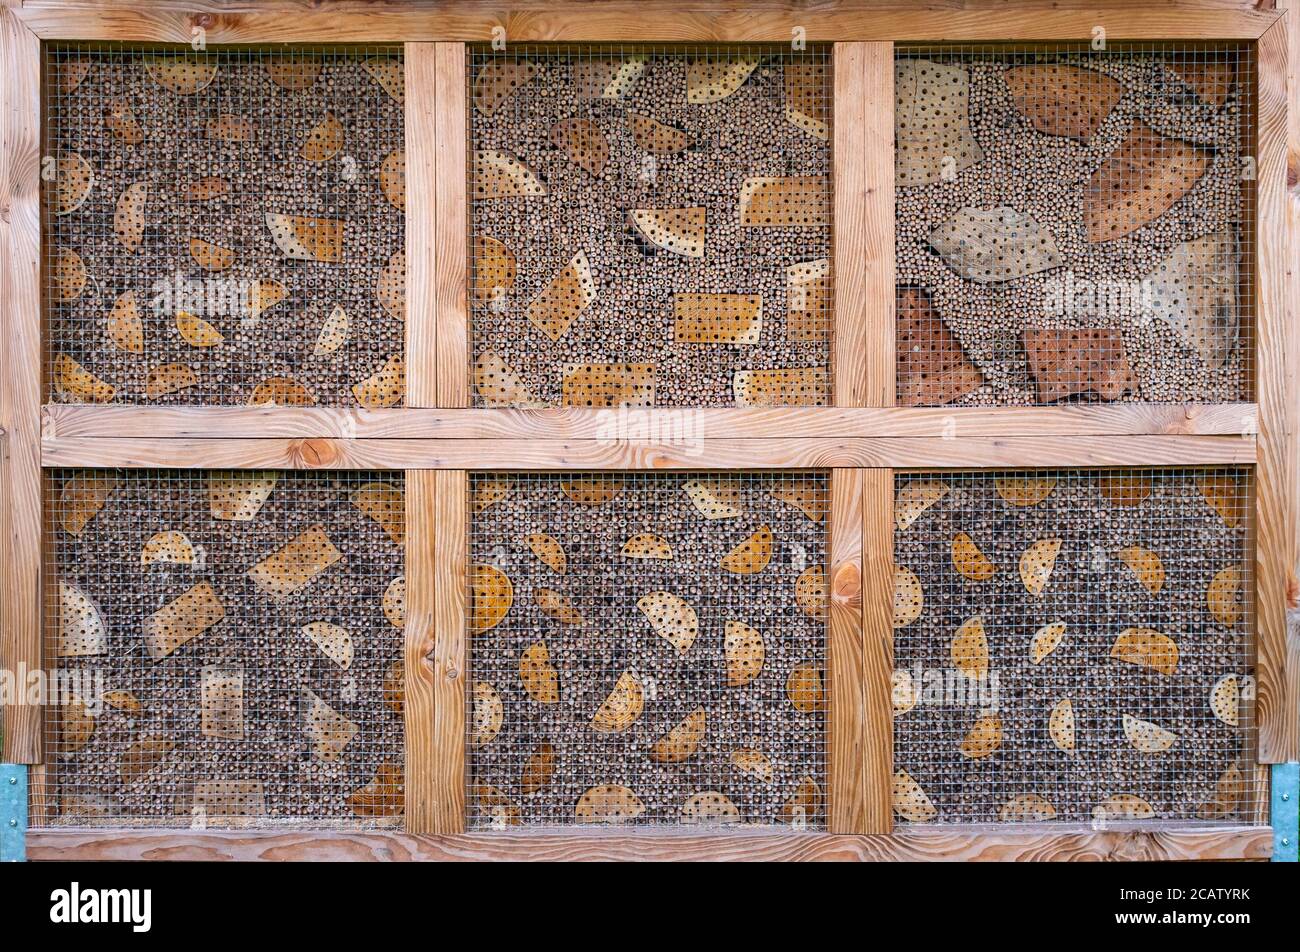 Insect hotel background Stock Photo